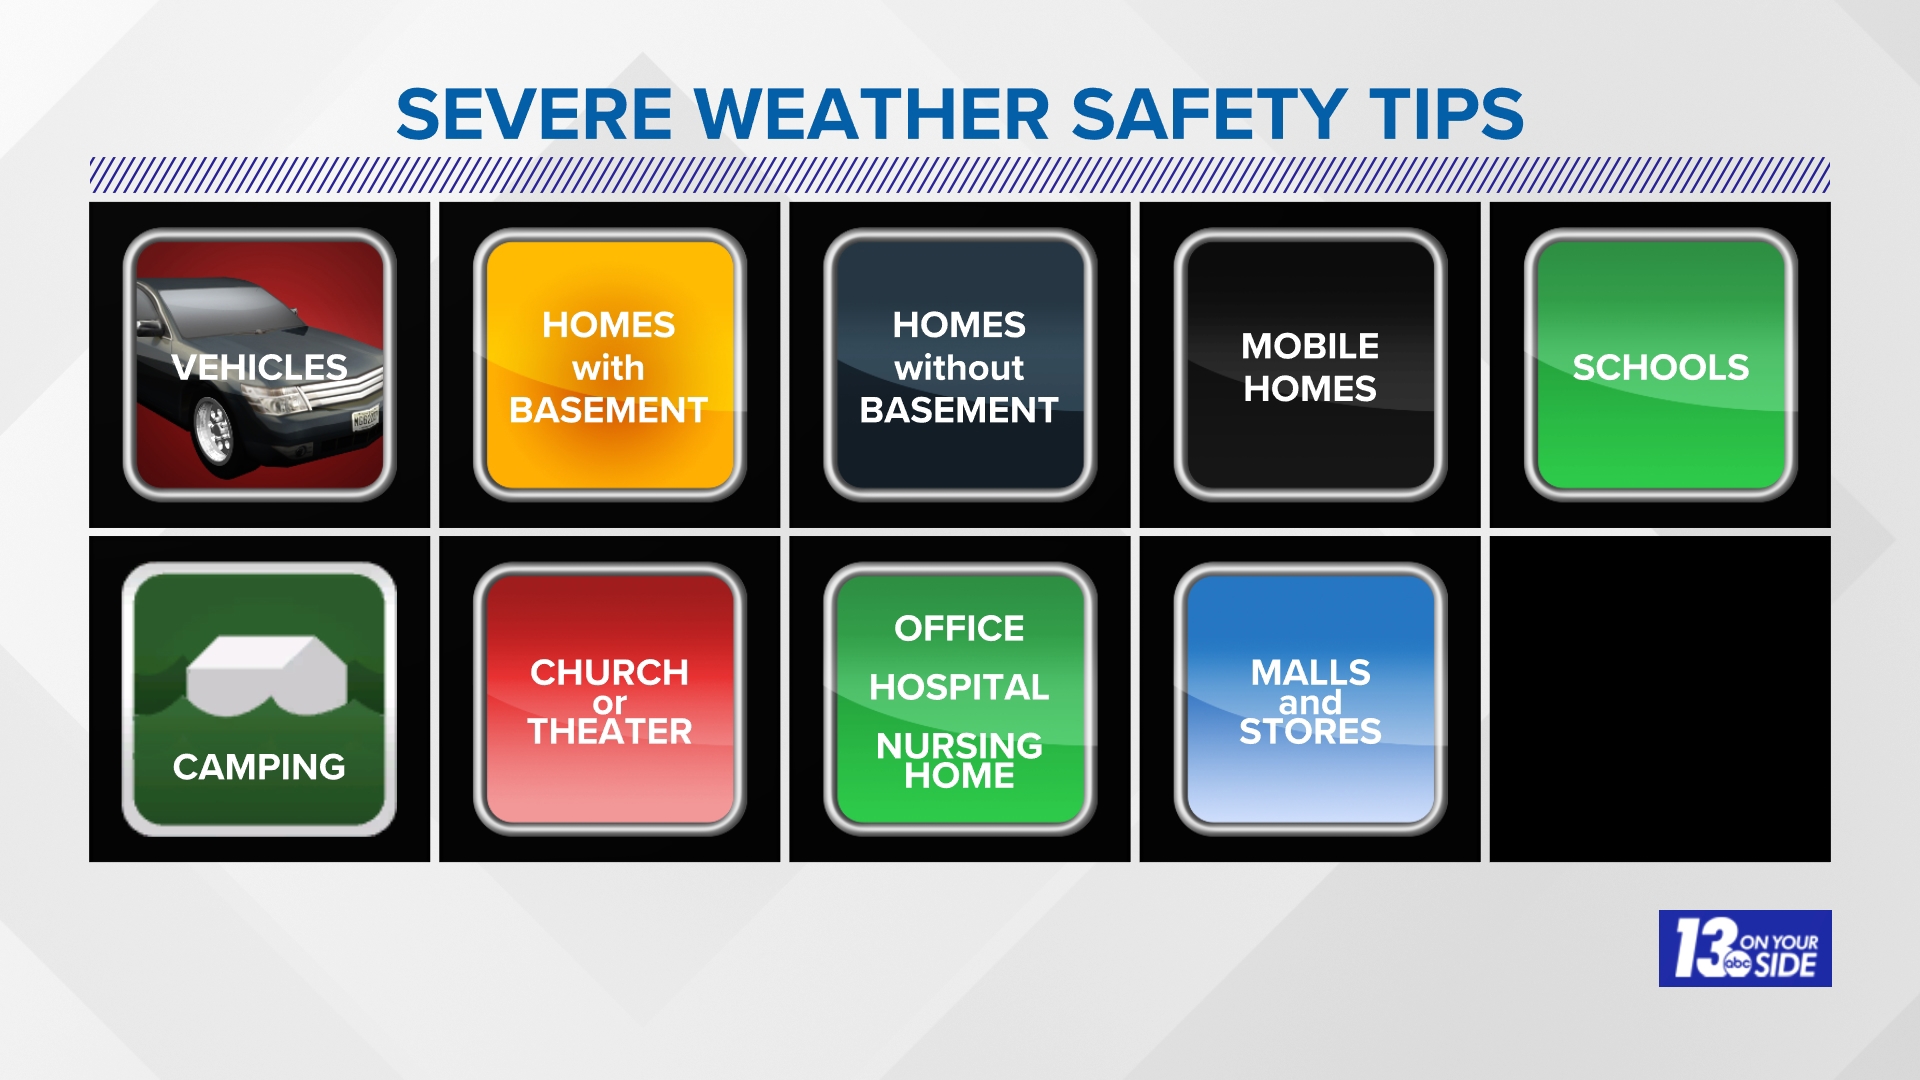 Safe Shelter Locations + Safety Tips